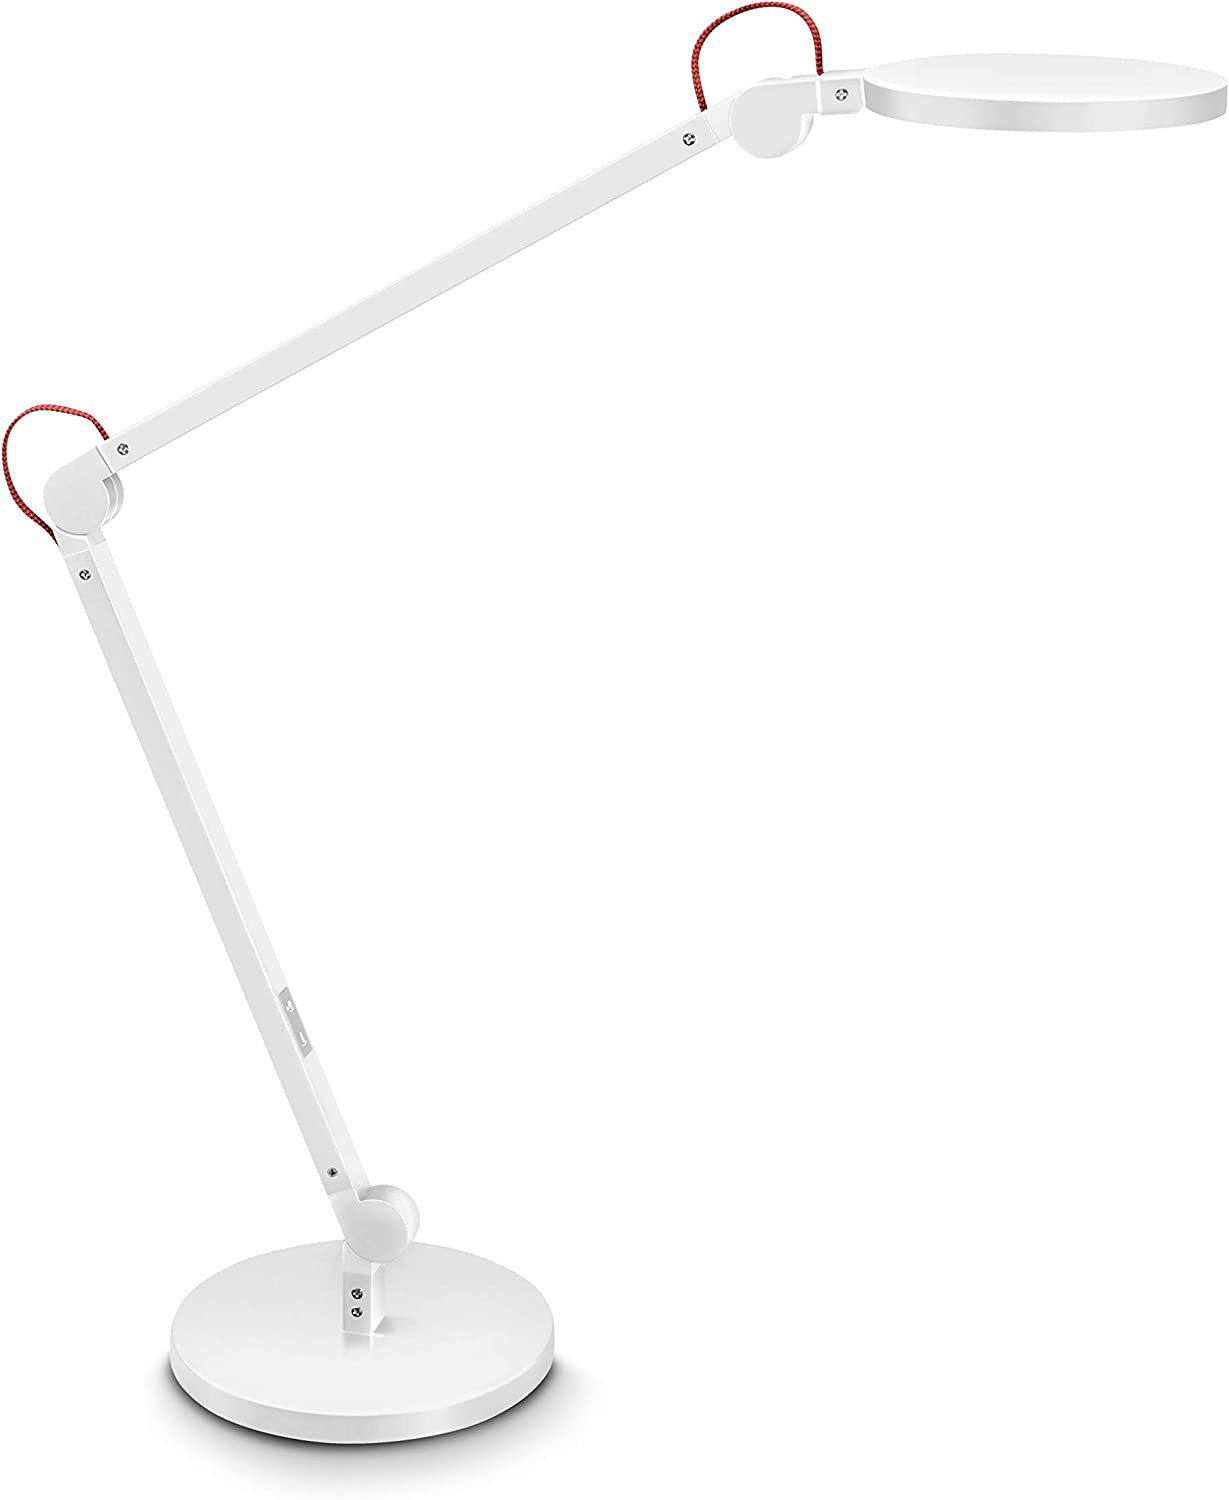 CEP Giant Cled-0350 Led 2003500021 lampe de tab. blanc